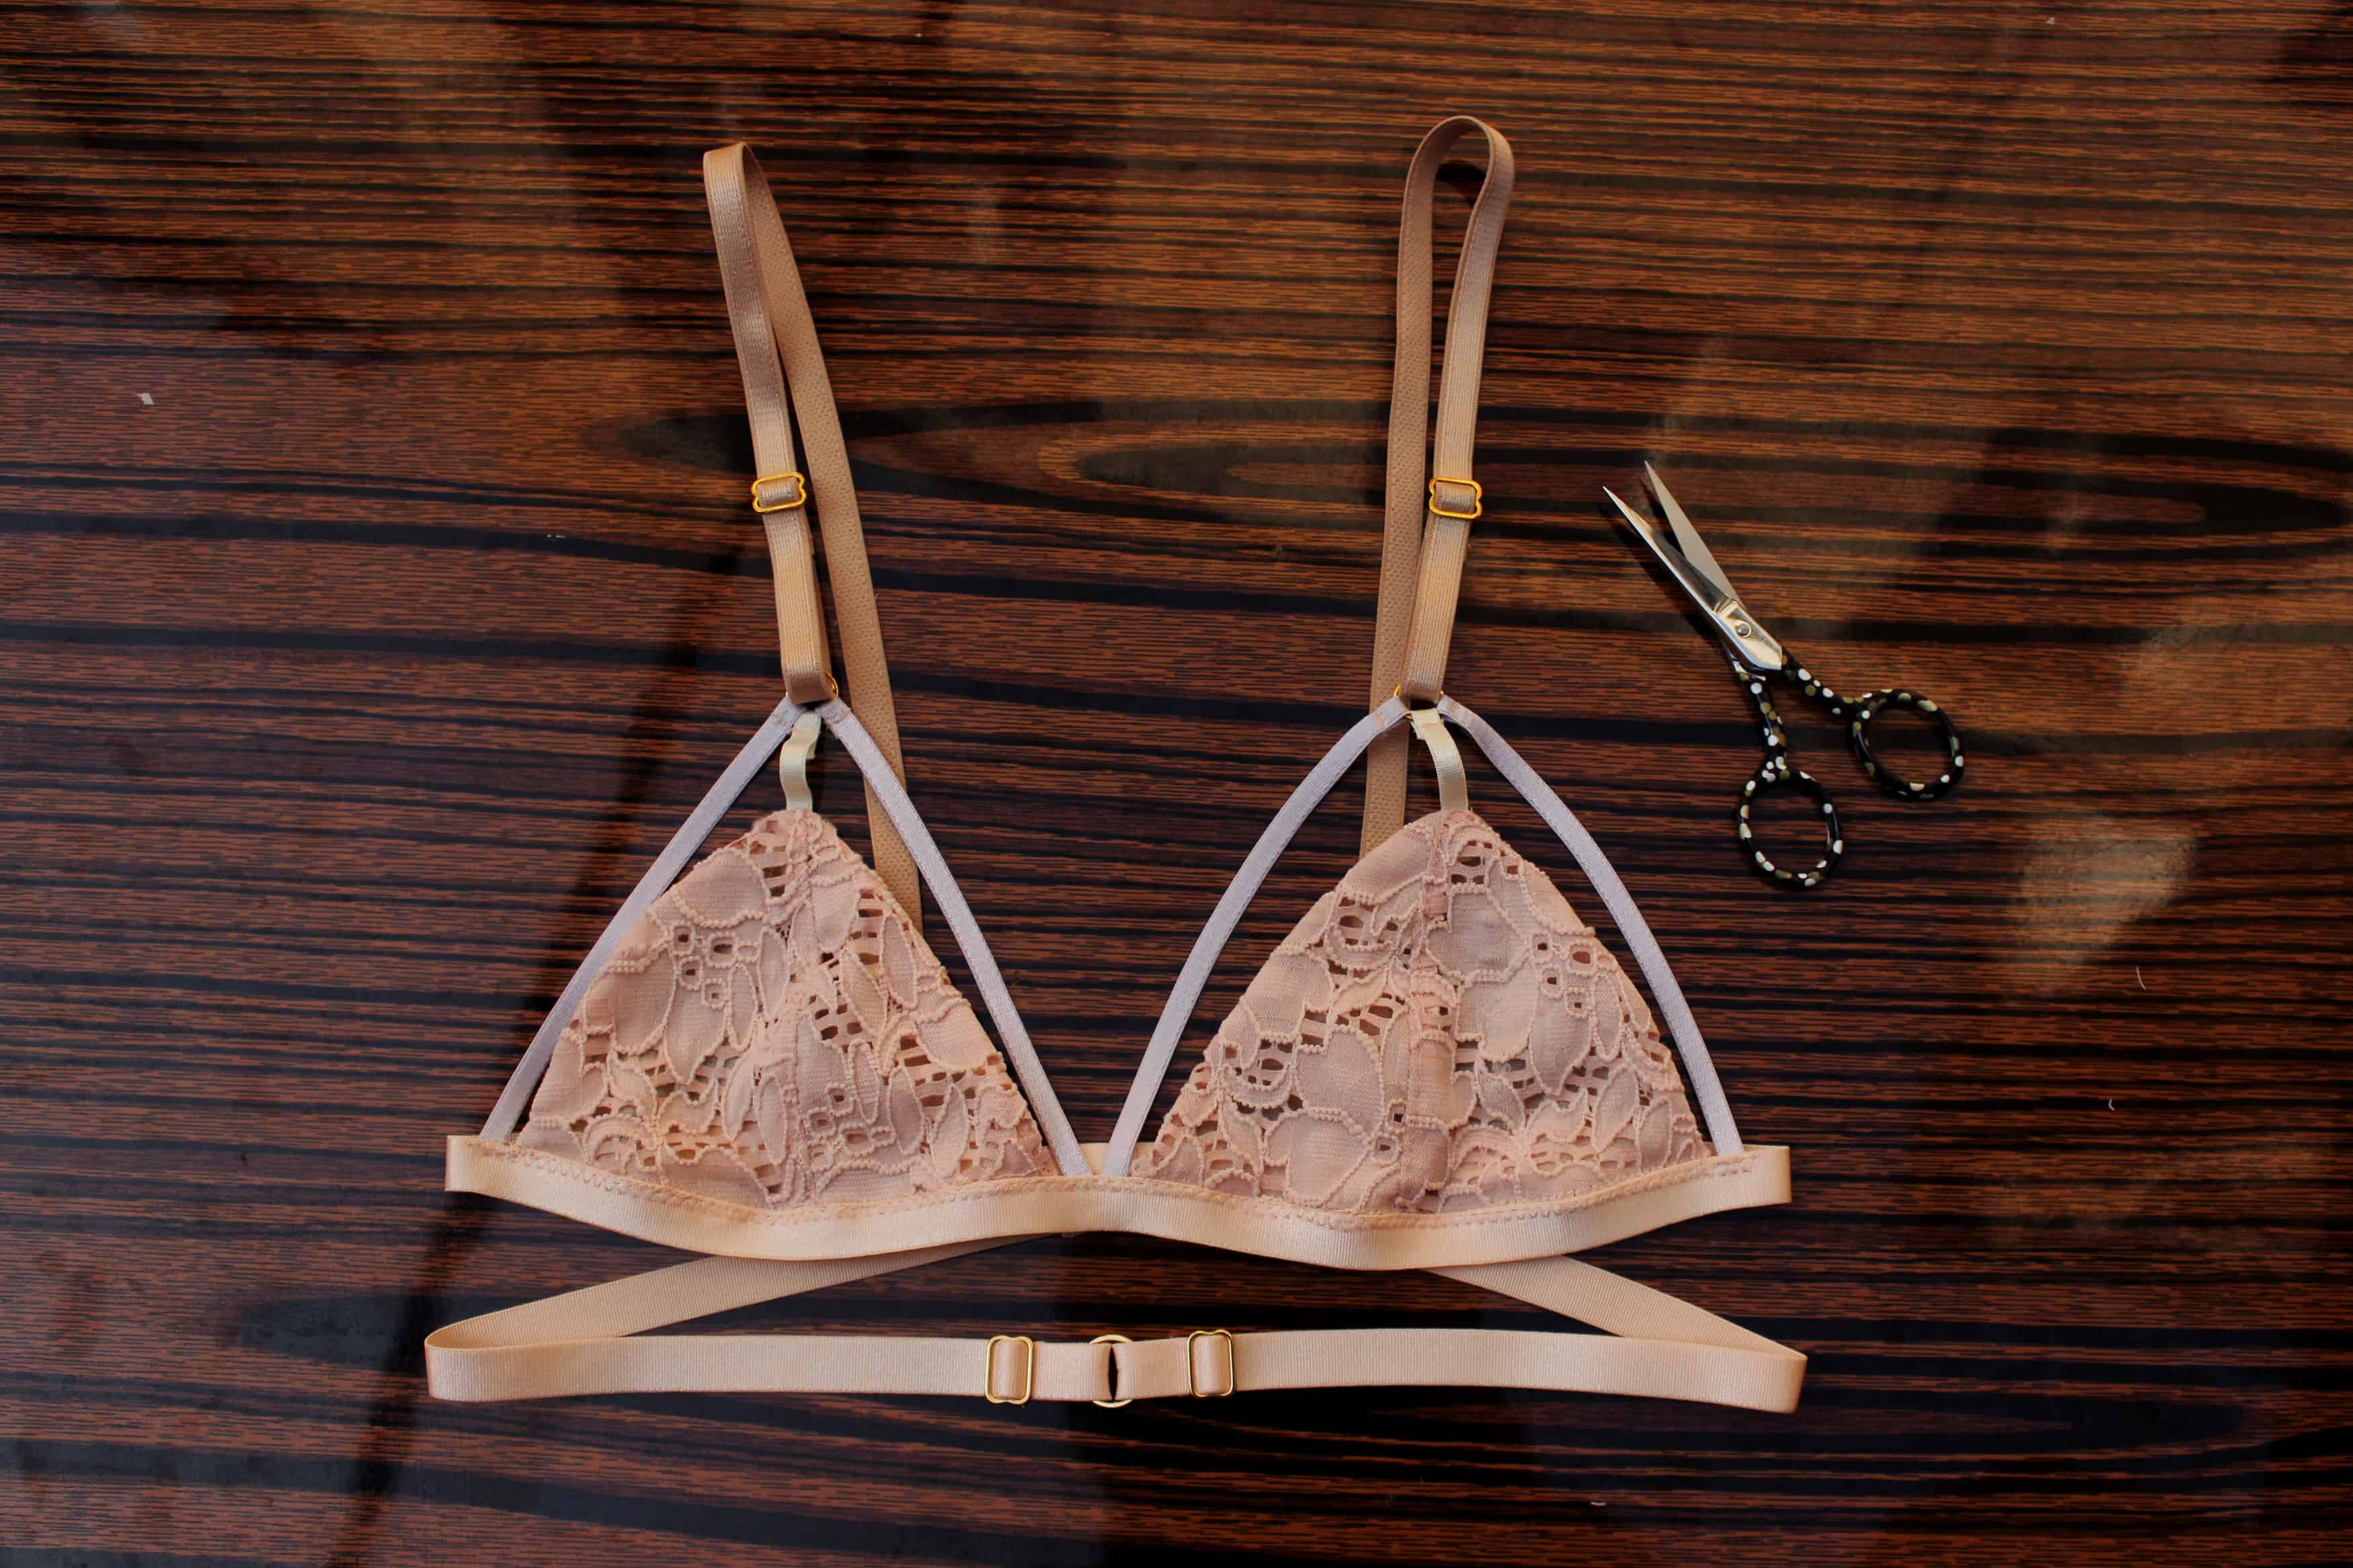 Diy Cage Bra. · How To Make A Bra · Sewing on Cut Out + Keep · How